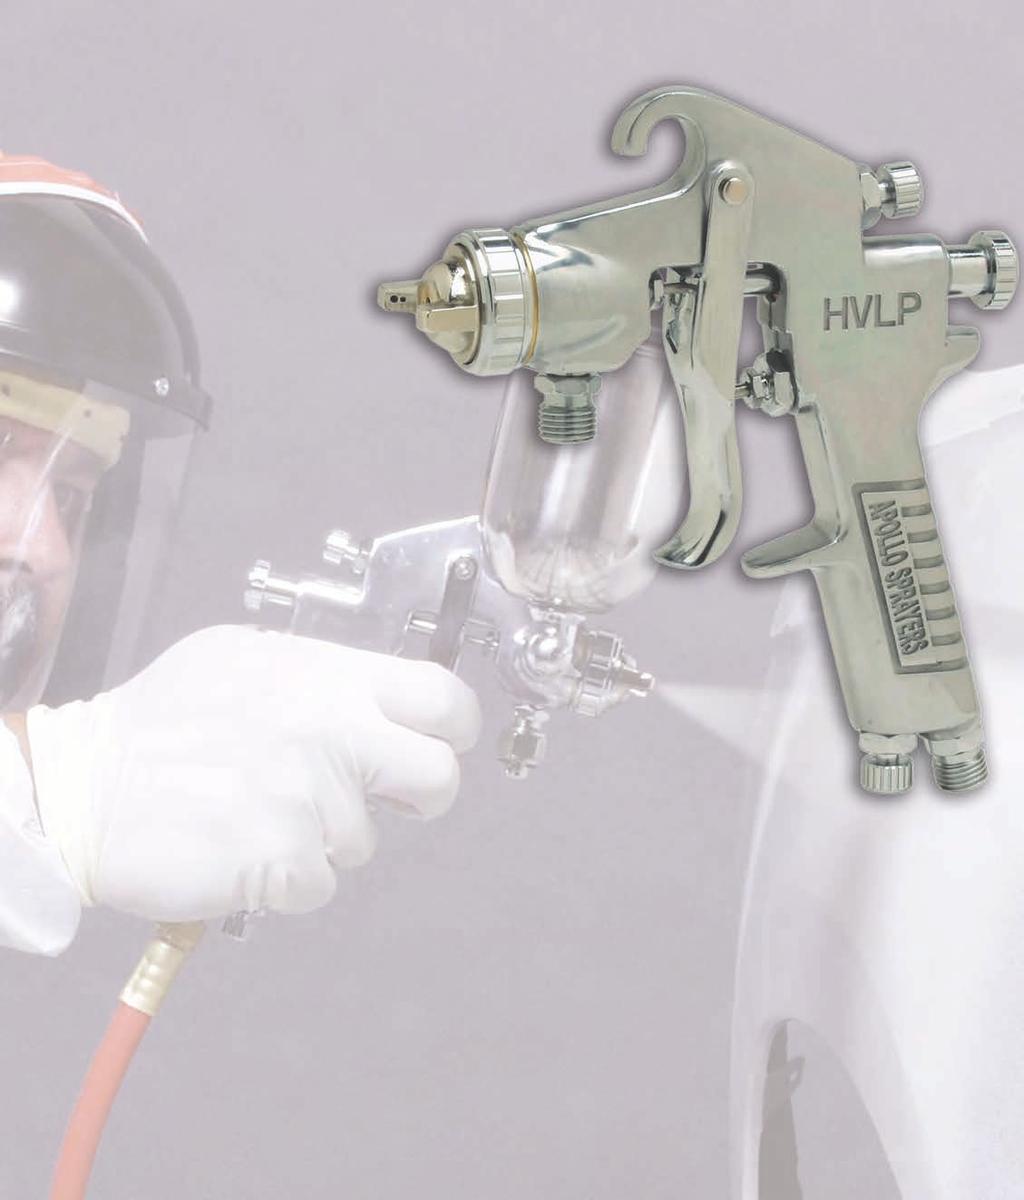 Celebrating True HVLP for over 40 years Super-Spray Conversion Spray Guns Series 8400 The 8400 Series Super-Spray Guns Provide Unmatched Comfort with Lightweight Design Good things come in small